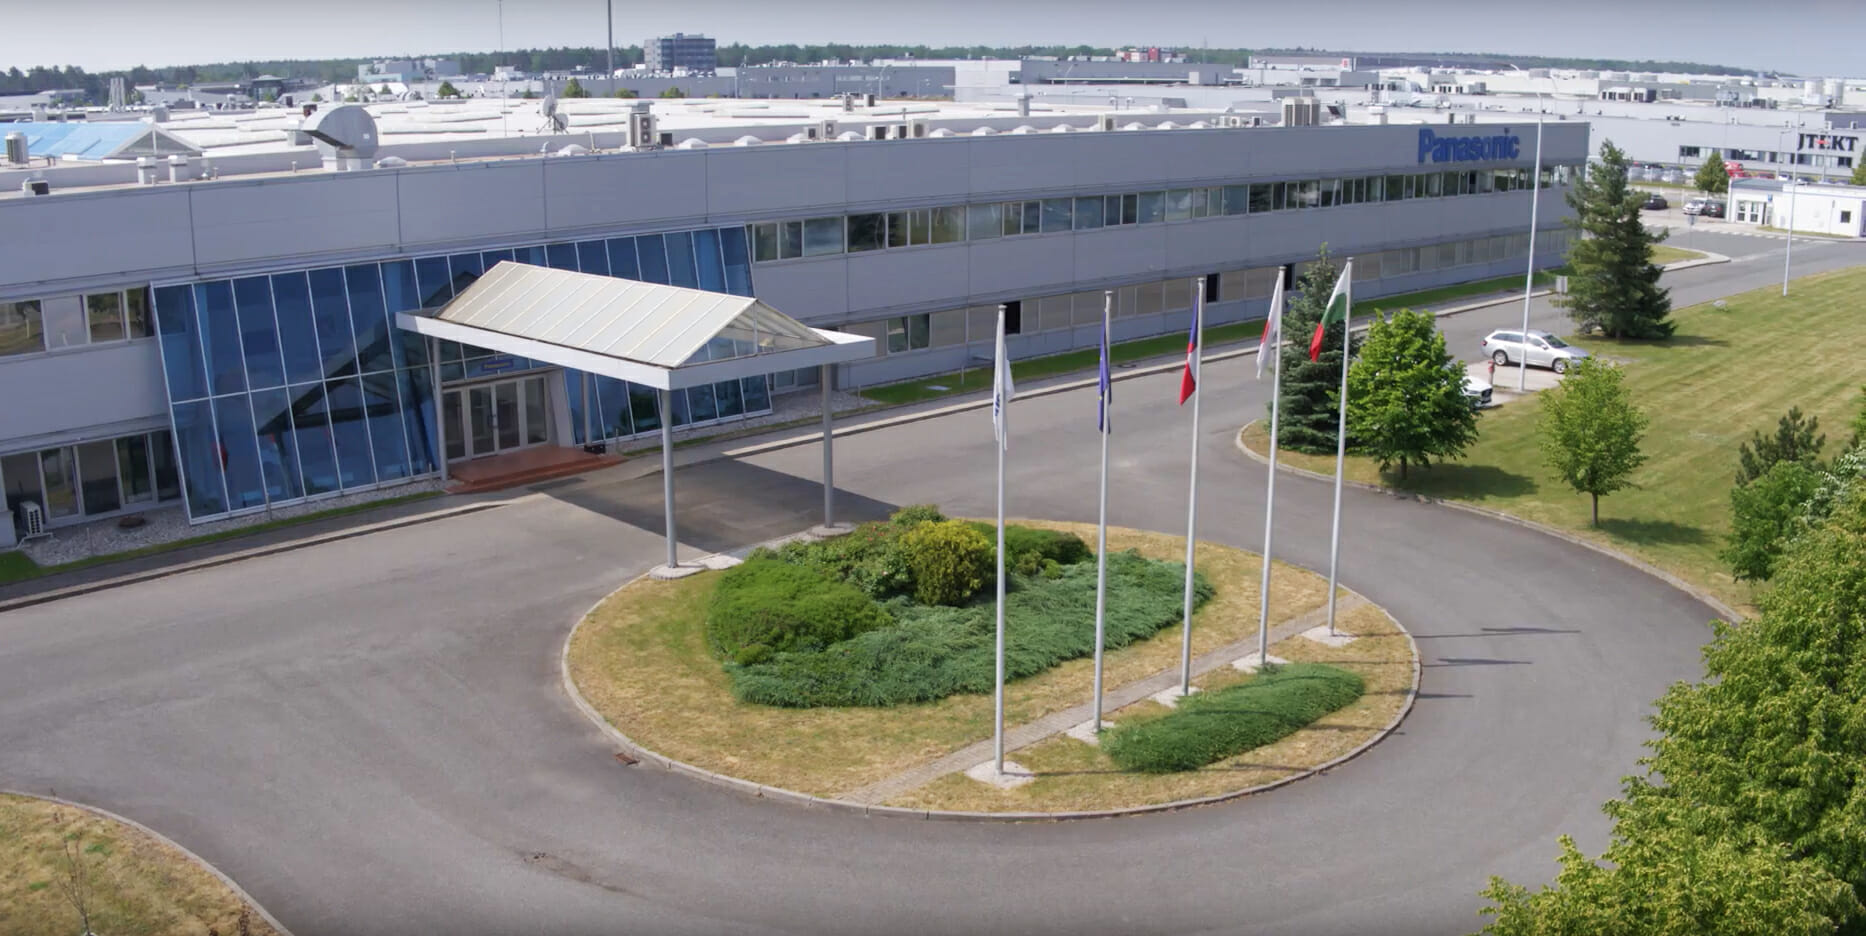 Panasonic Starts HVAC Manufacturing with Aquarea Production Line in Europe